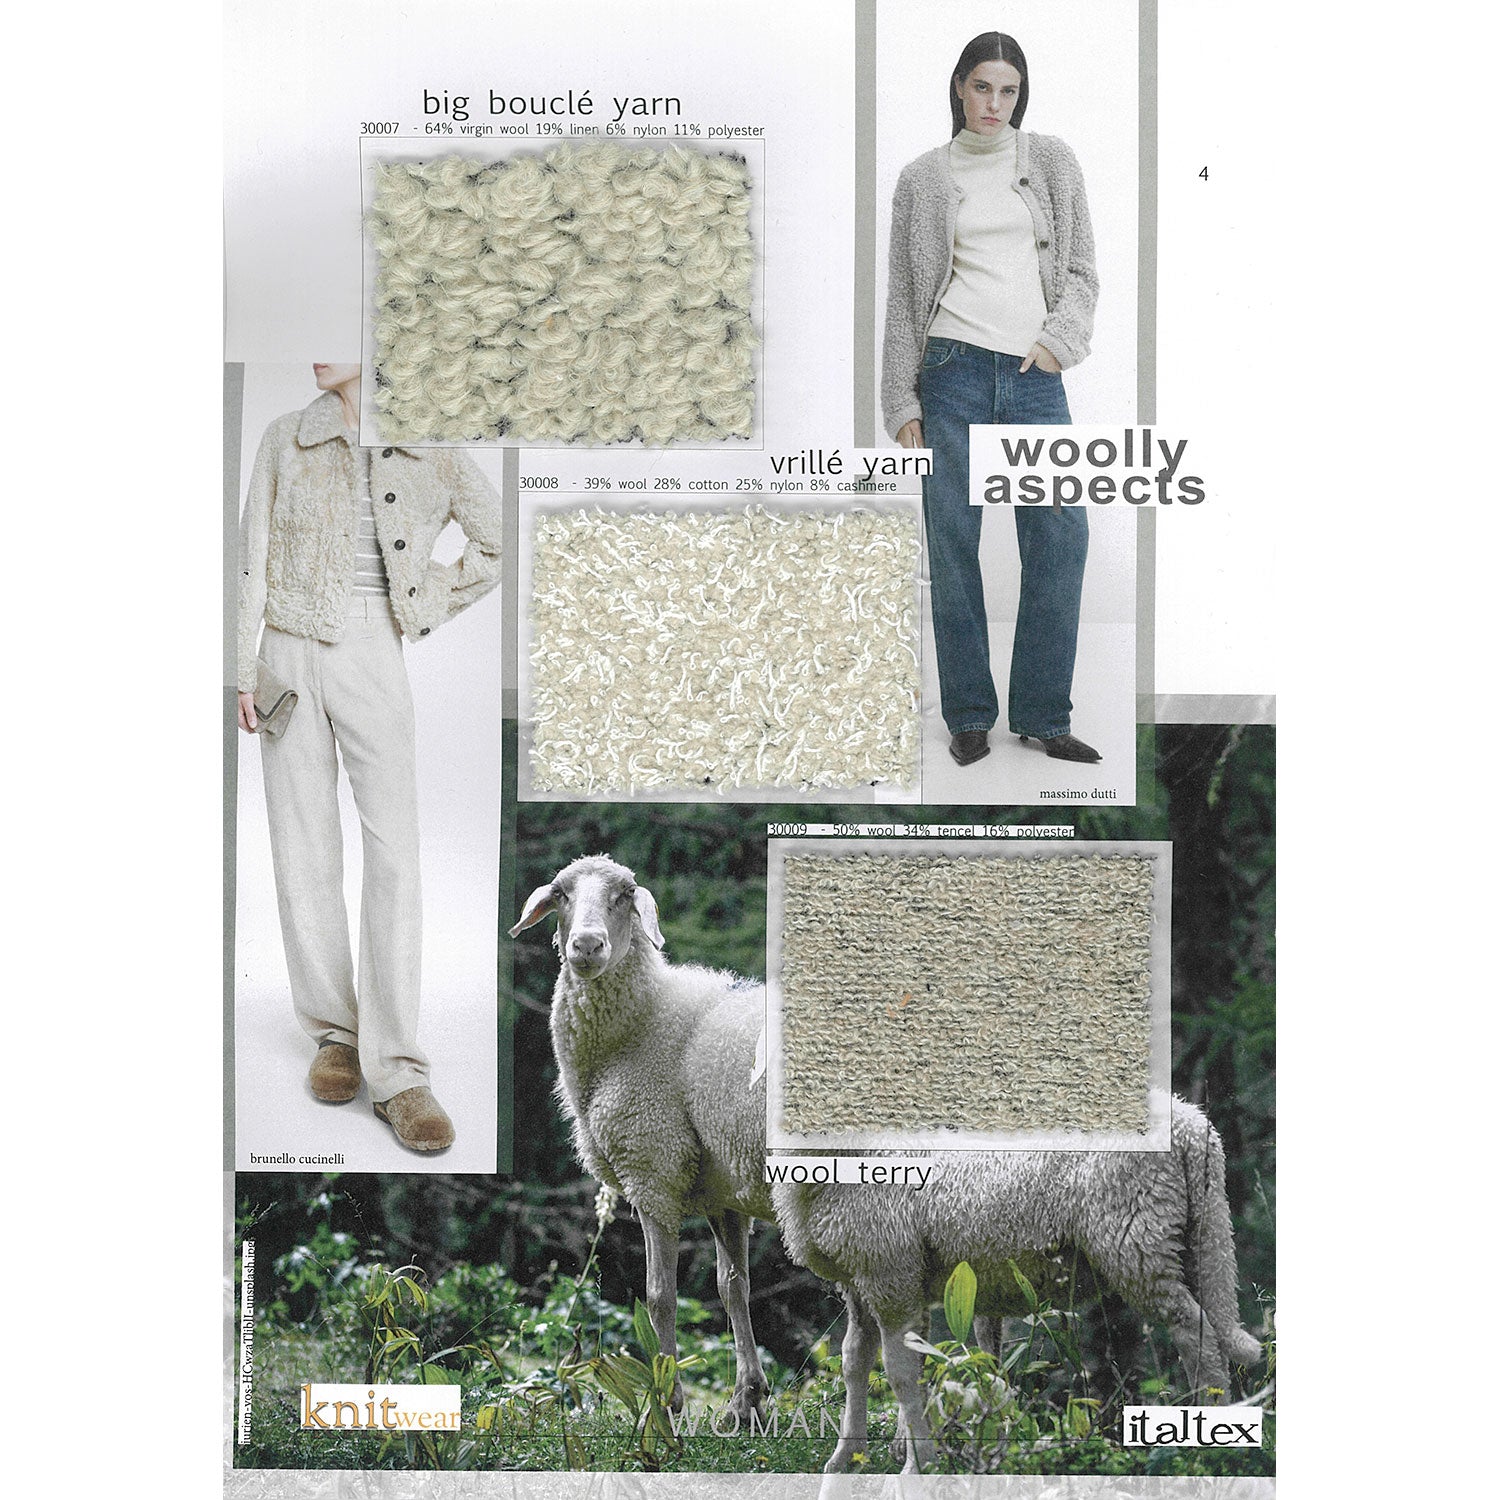 One page of fabric trends for 2025 from the Italtex color and fabric trend book Knitwear  AW 25/26 displays three fabric swatches of off white knit fabrics. One is a bulky off white knit in big loopy yarns for sweaters or jackets. One is a knitted fabric in vrillé yarns. One is a wool terry. In the mood board there is also the picture of two sheeps, and two pictures on the suggested use of these fabrics.